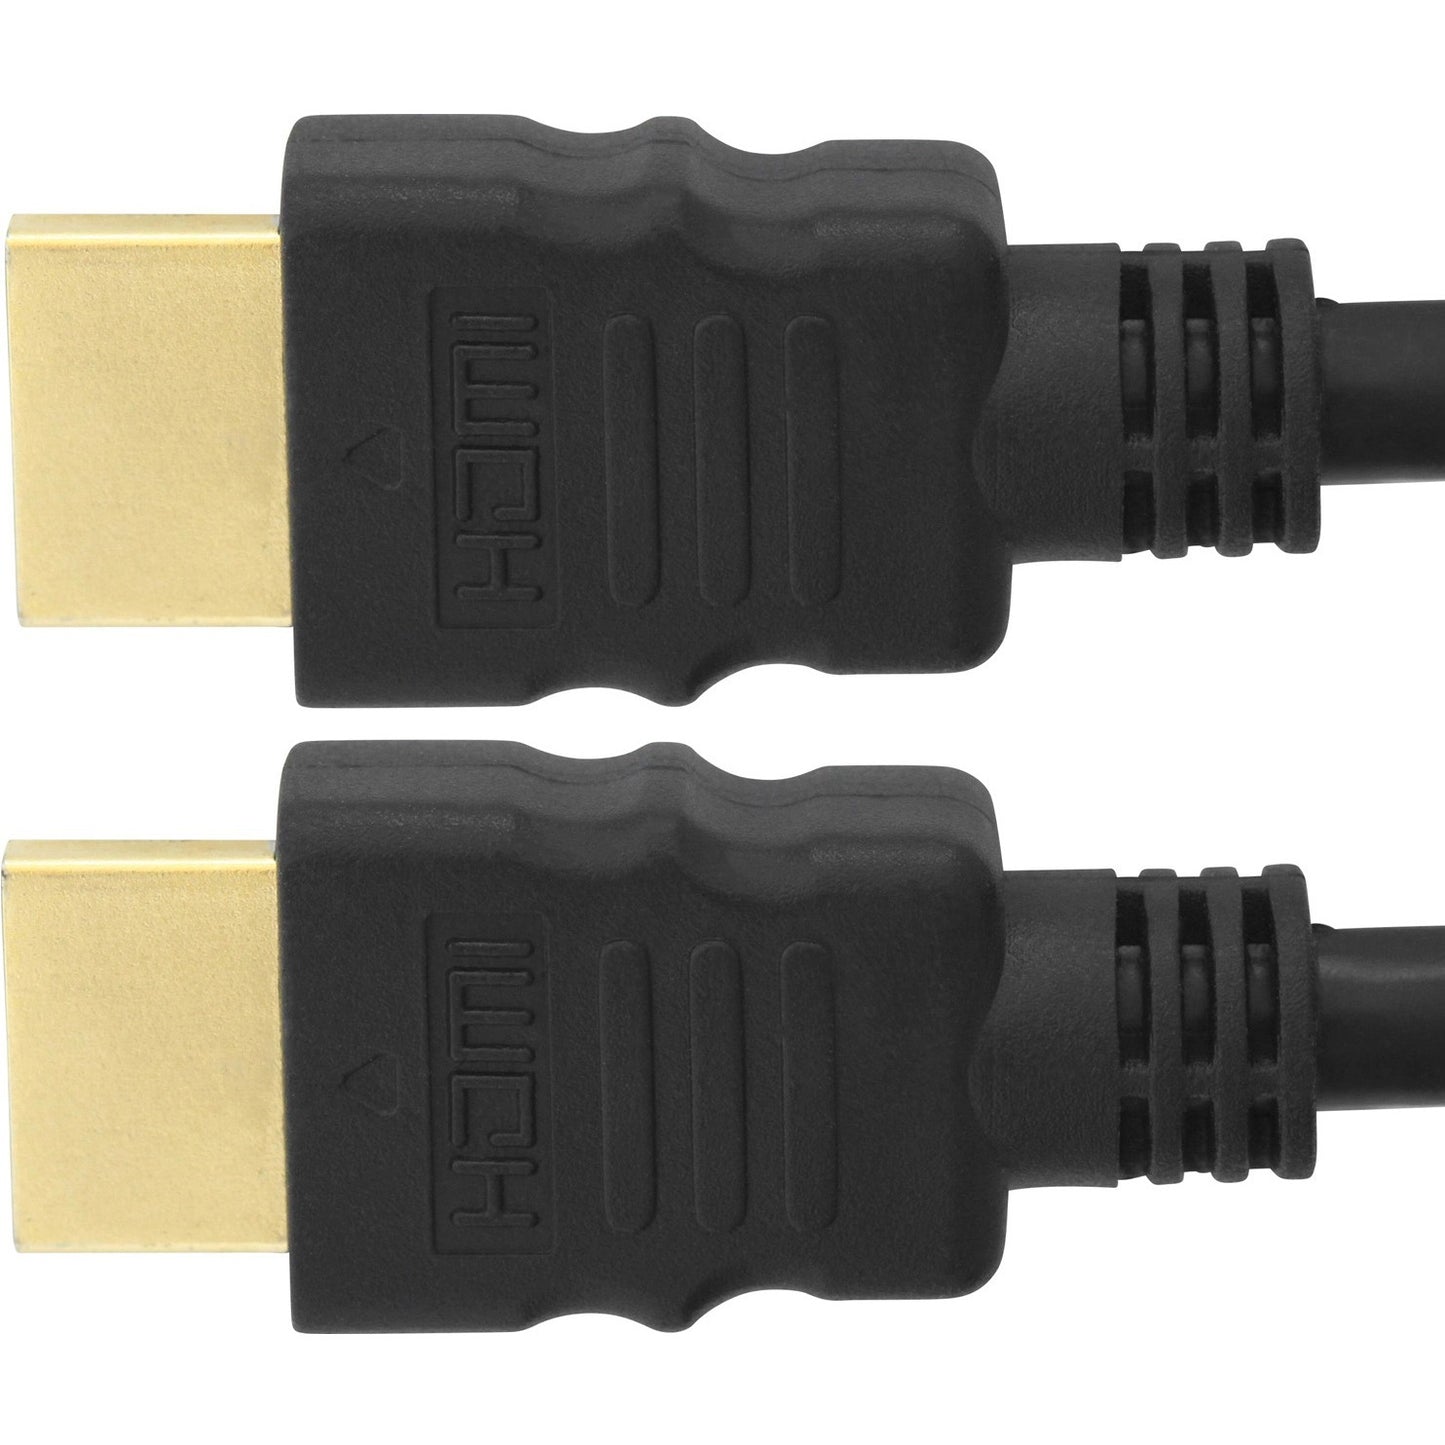 4XEM 25FT 8M High Speed HDMI cable SpadezStore